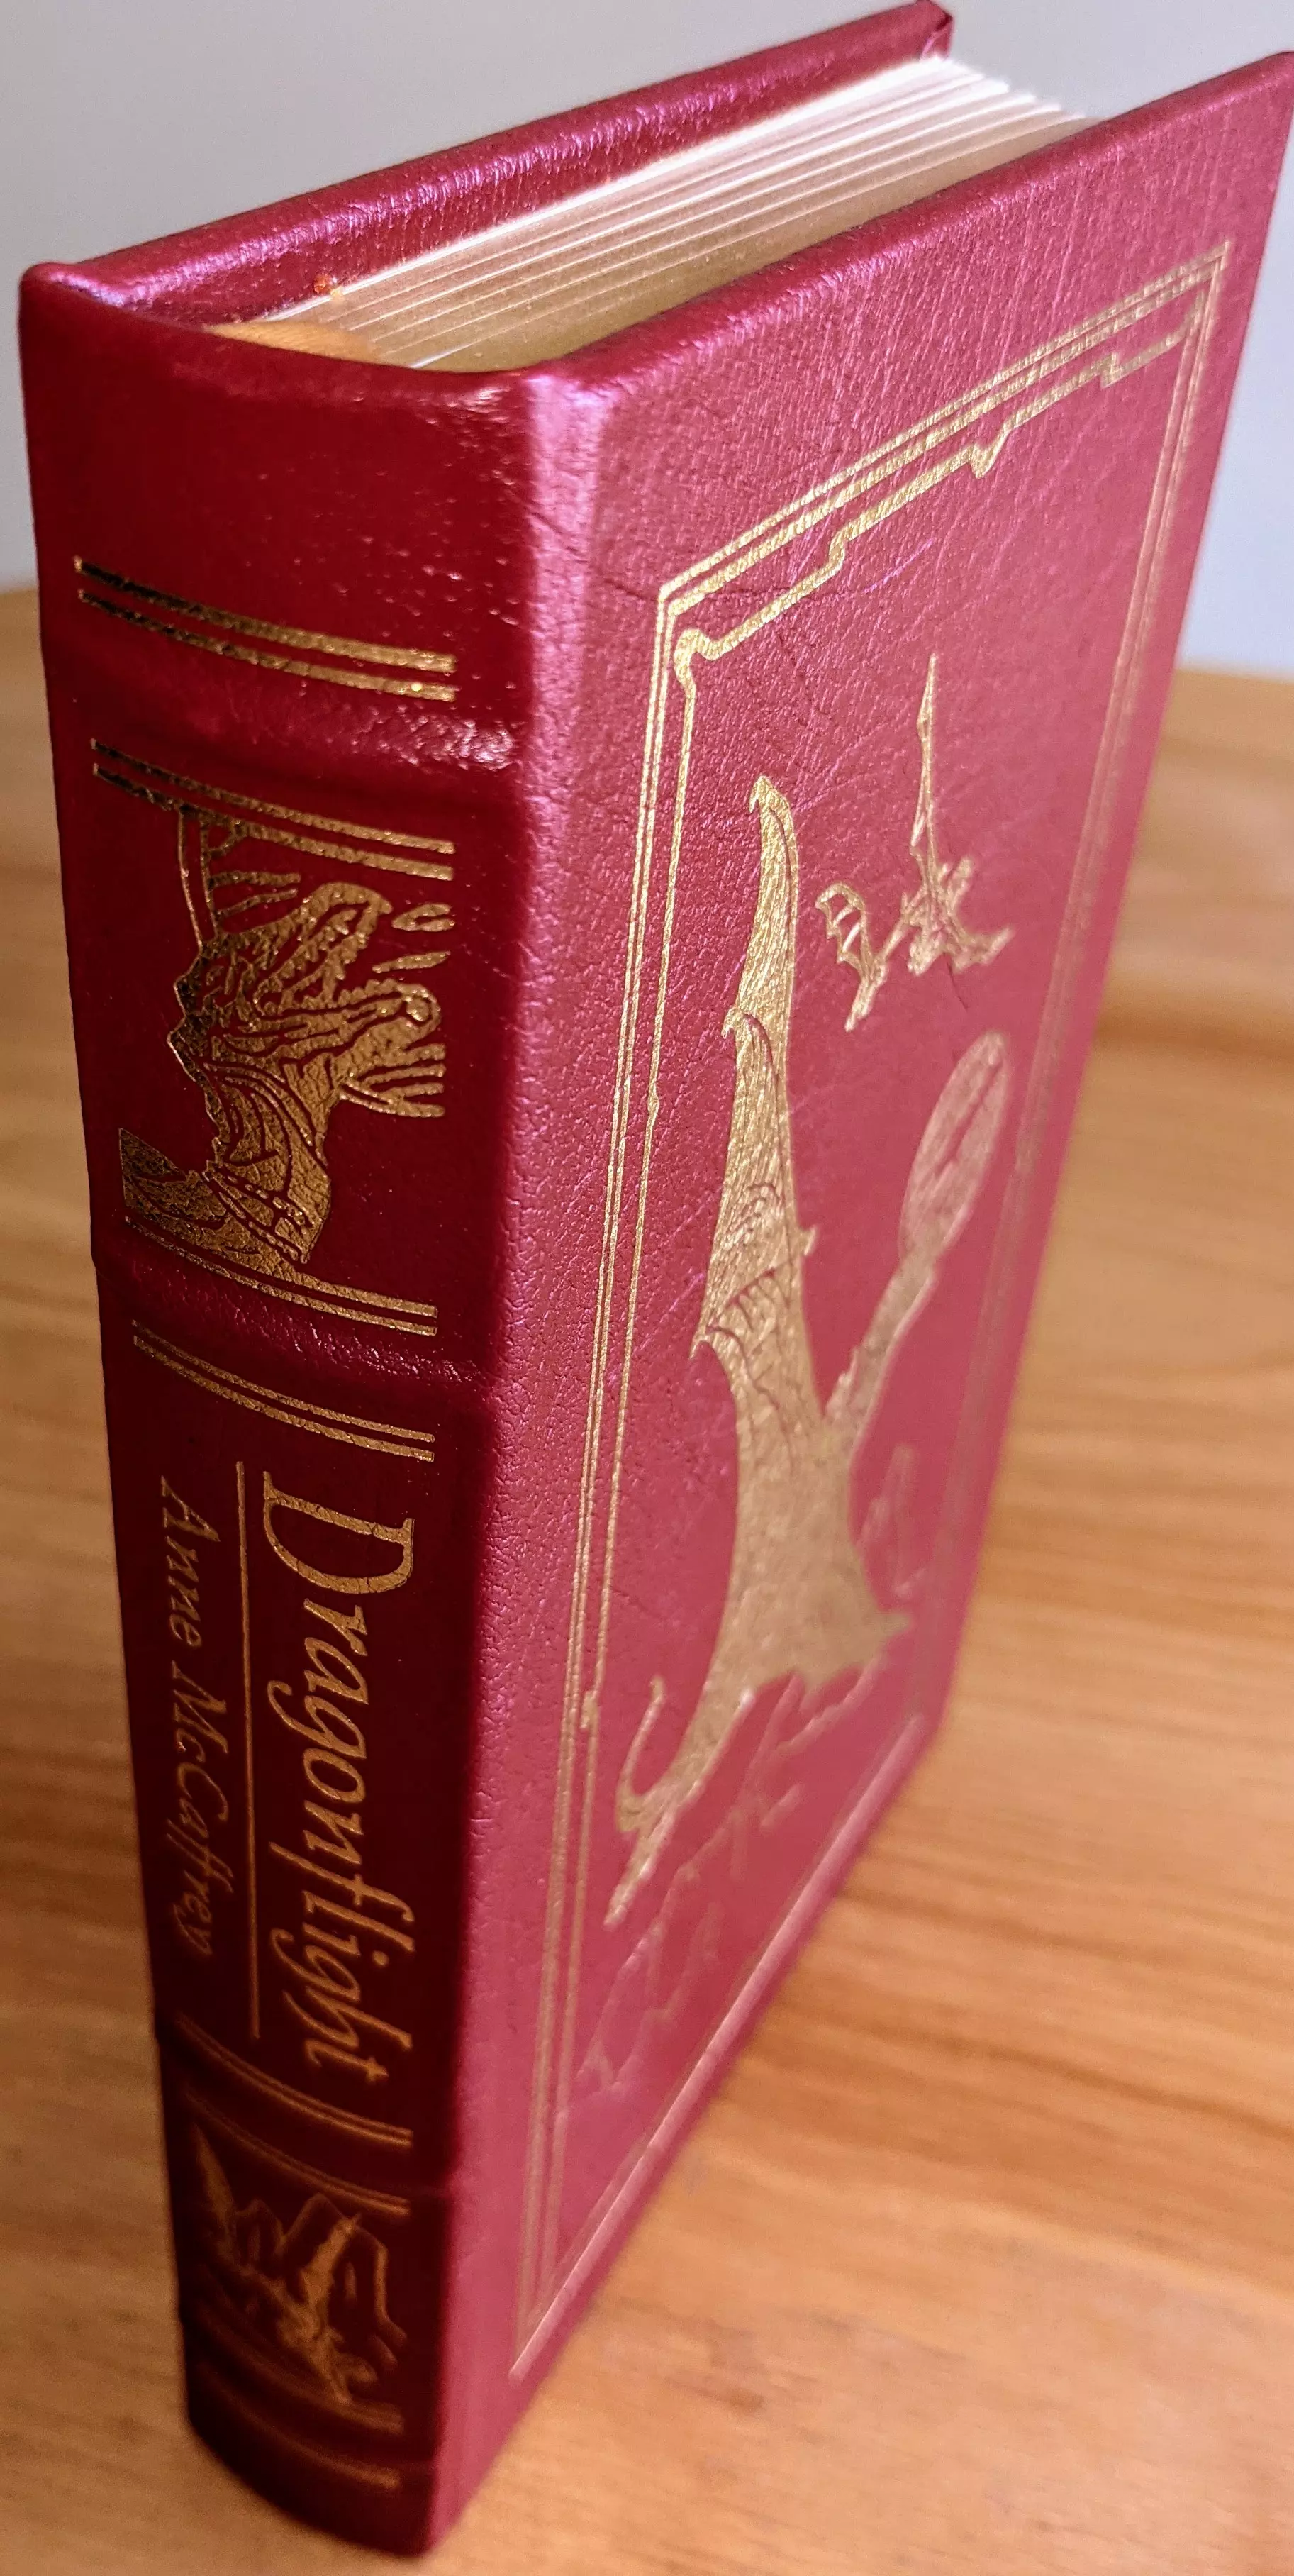 Stunning Red Leather Bound hardback book with hubbed spine, cover artwork in 22kt gold, printed on archival paper with gold gilded edges, smyth sewing & concealed muslin joints
	  - original artwork by Michael Whelan